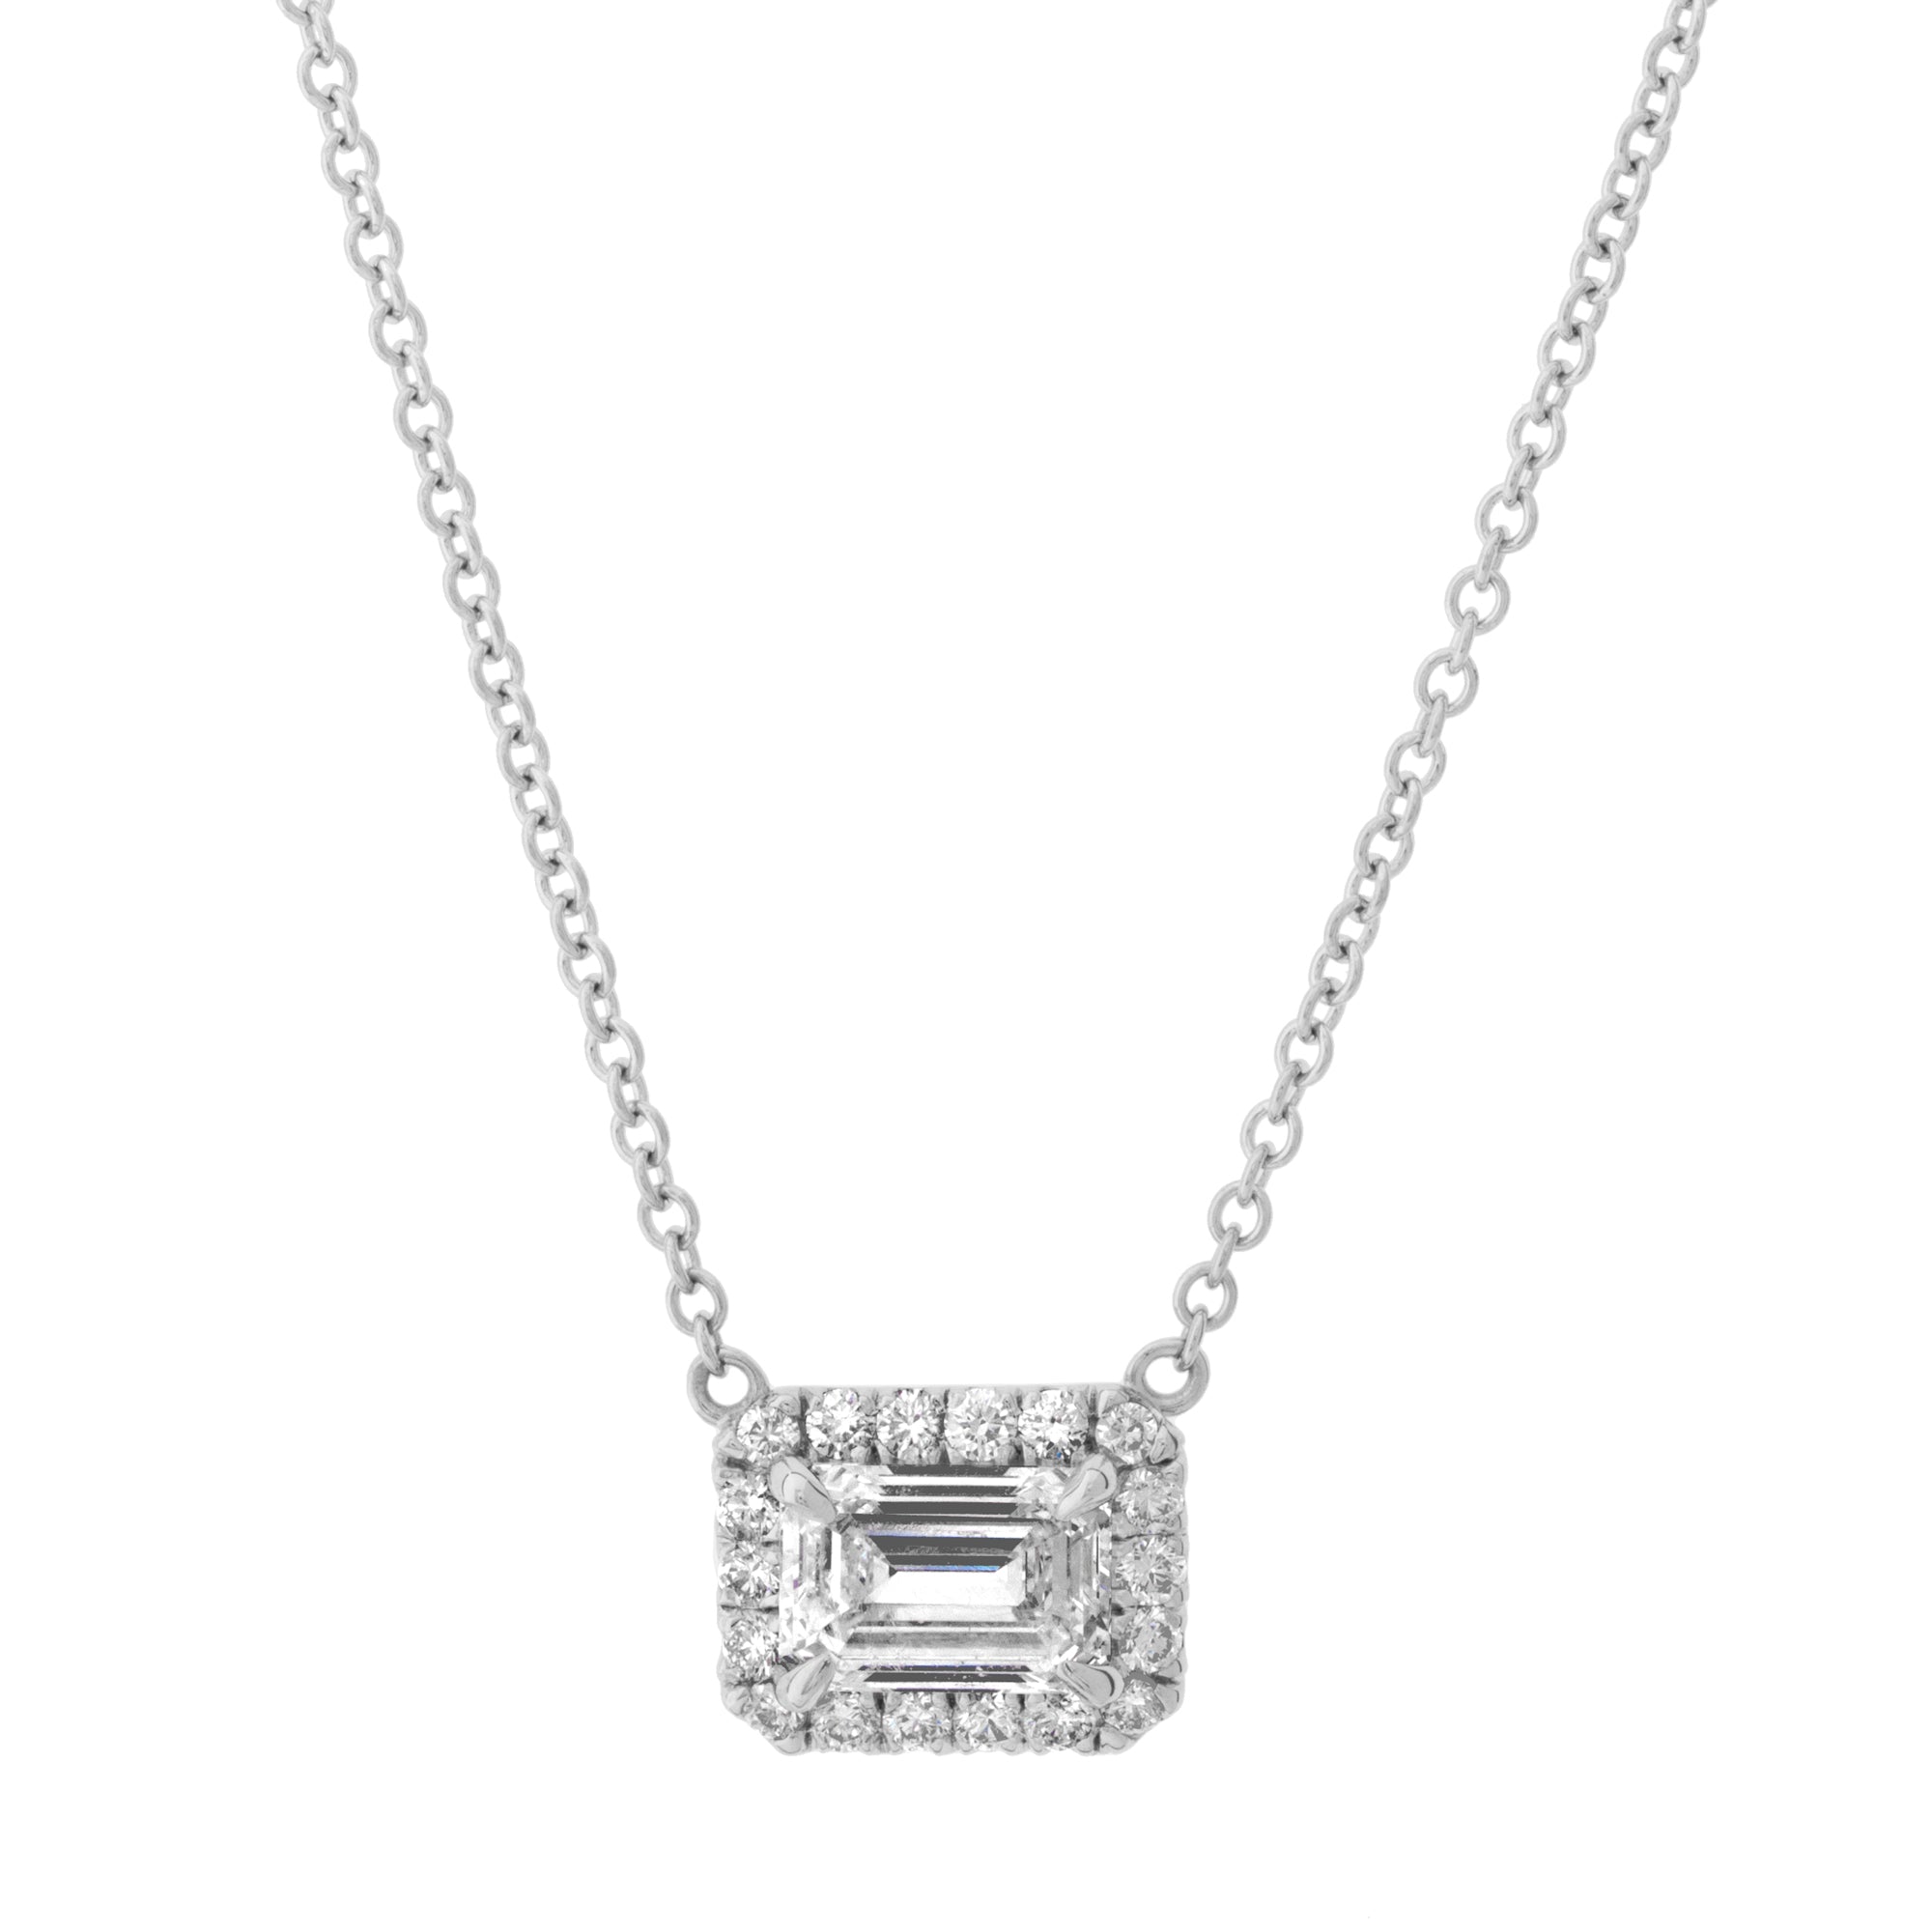 Buy Two-Tier Diamond Necklace Set In Silver Plating With Emerald Stones